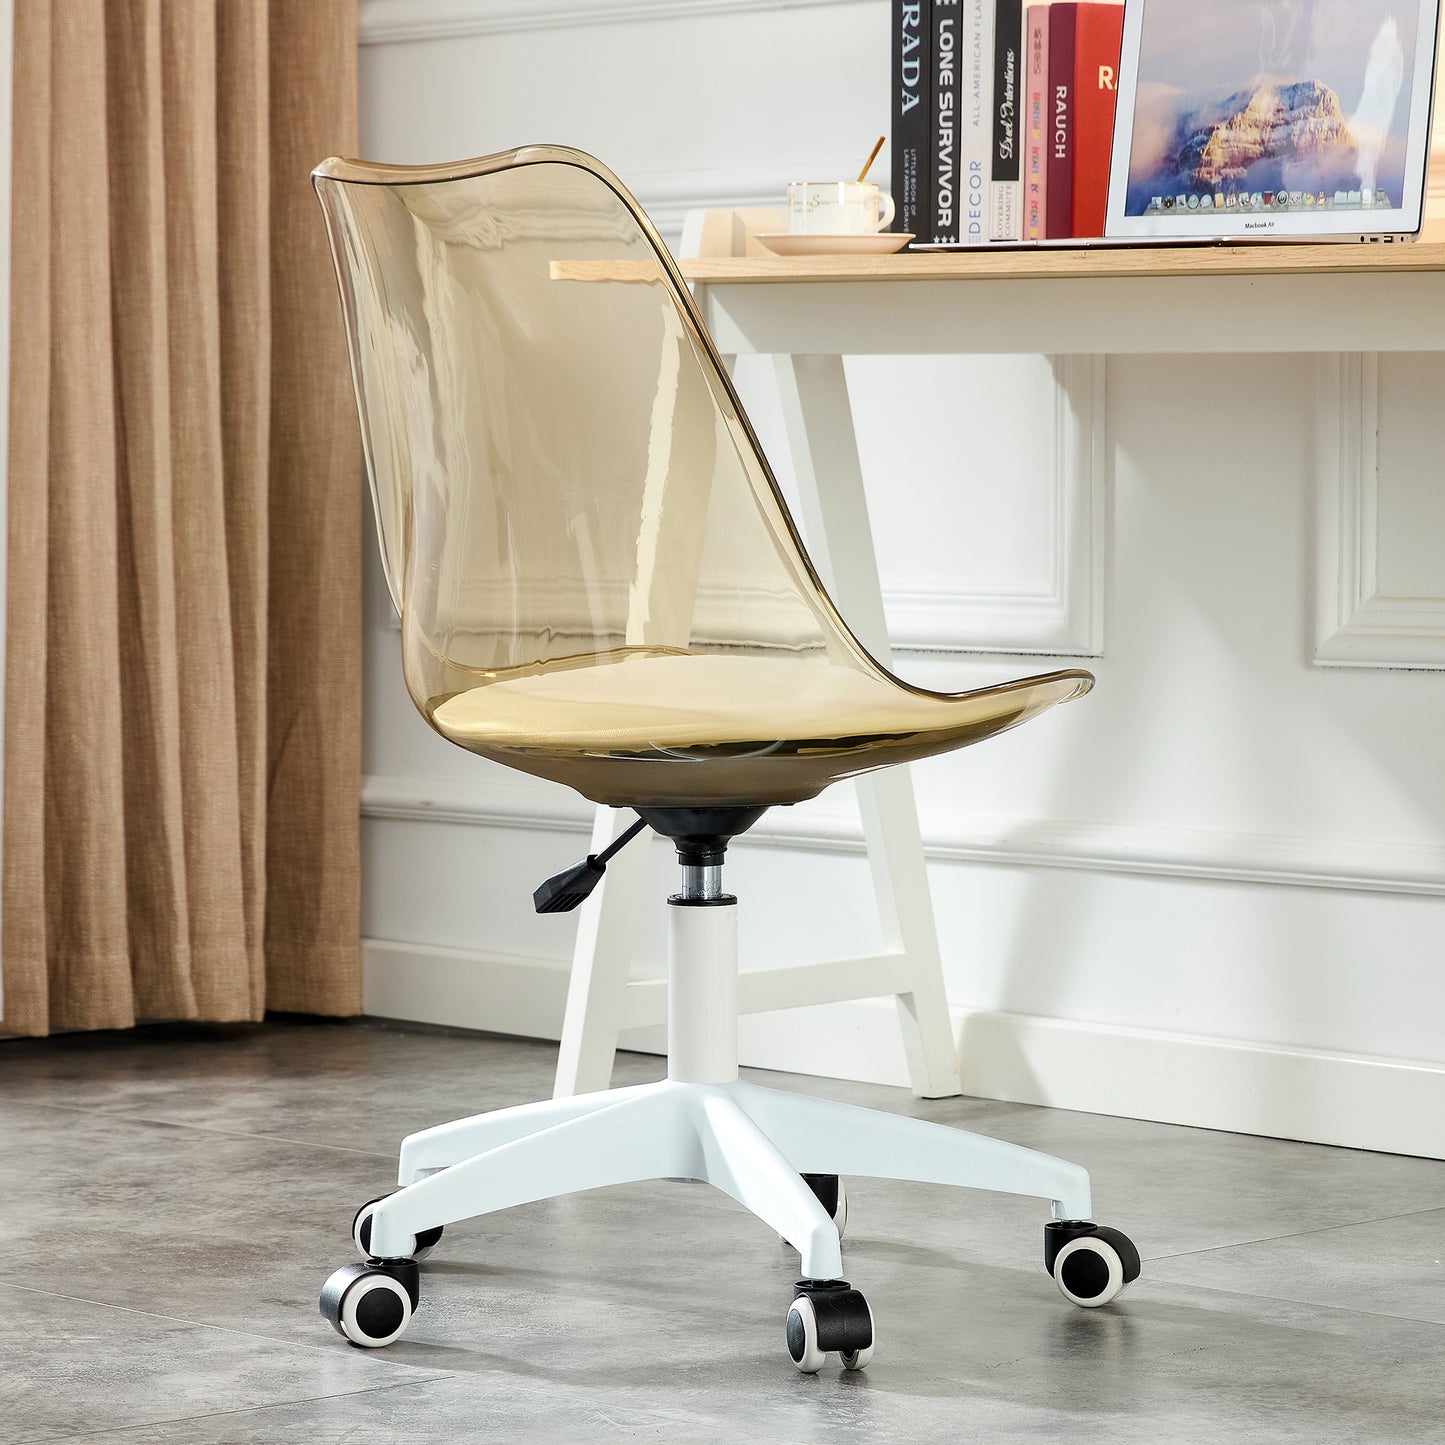 Home Office Desk Chairs, Adjustable 360 °Swivel Chair